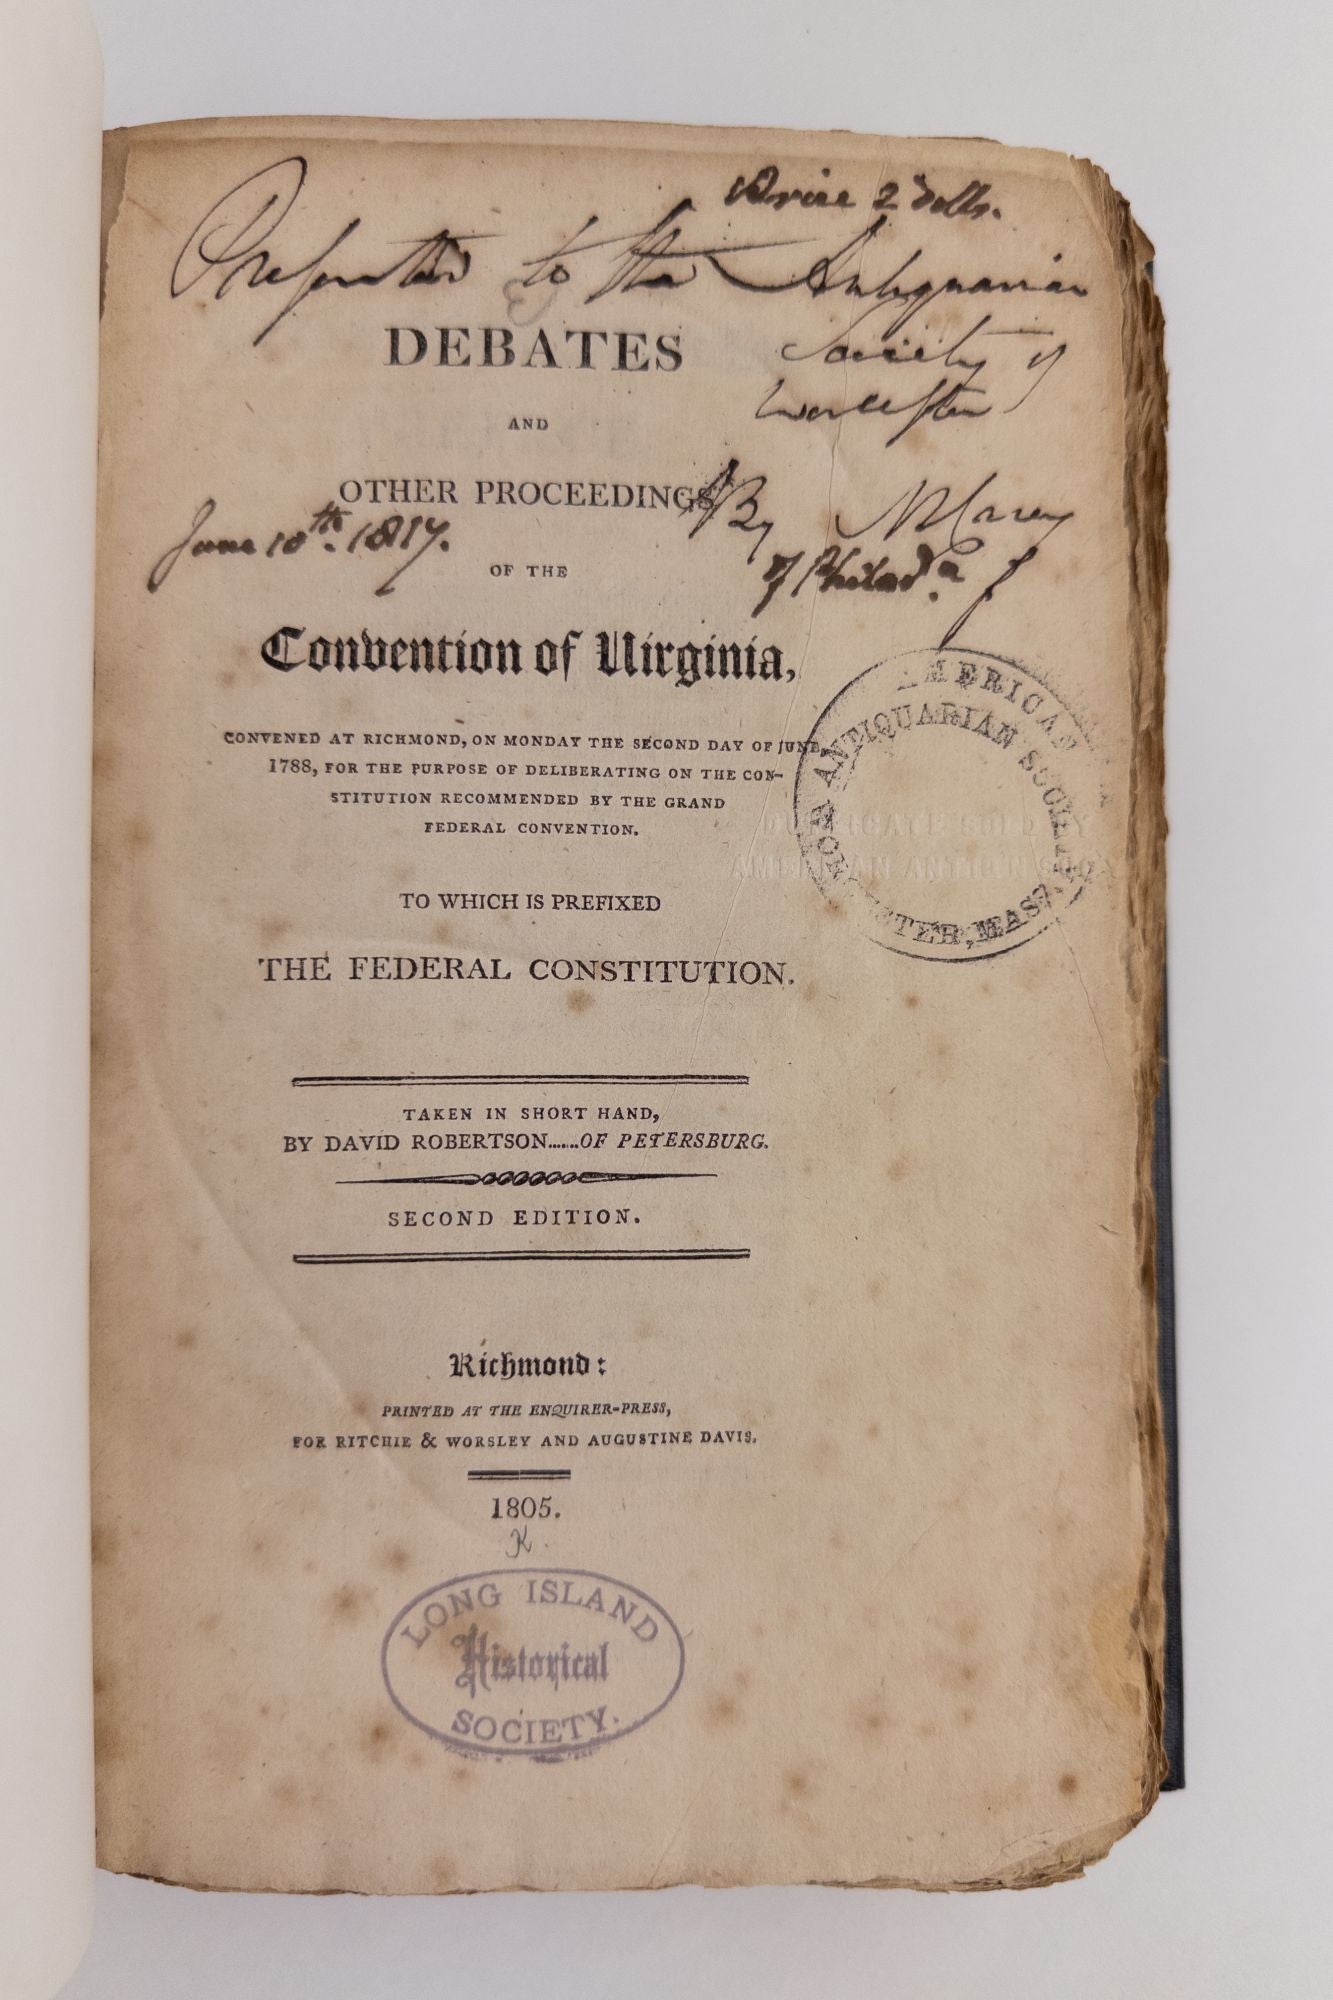 Product Image for DEBATES AND OTHER PROCEEDINGS OF THE CONVENTION OF VIRGINIA [SIGNED BY MATHEW CAREY]